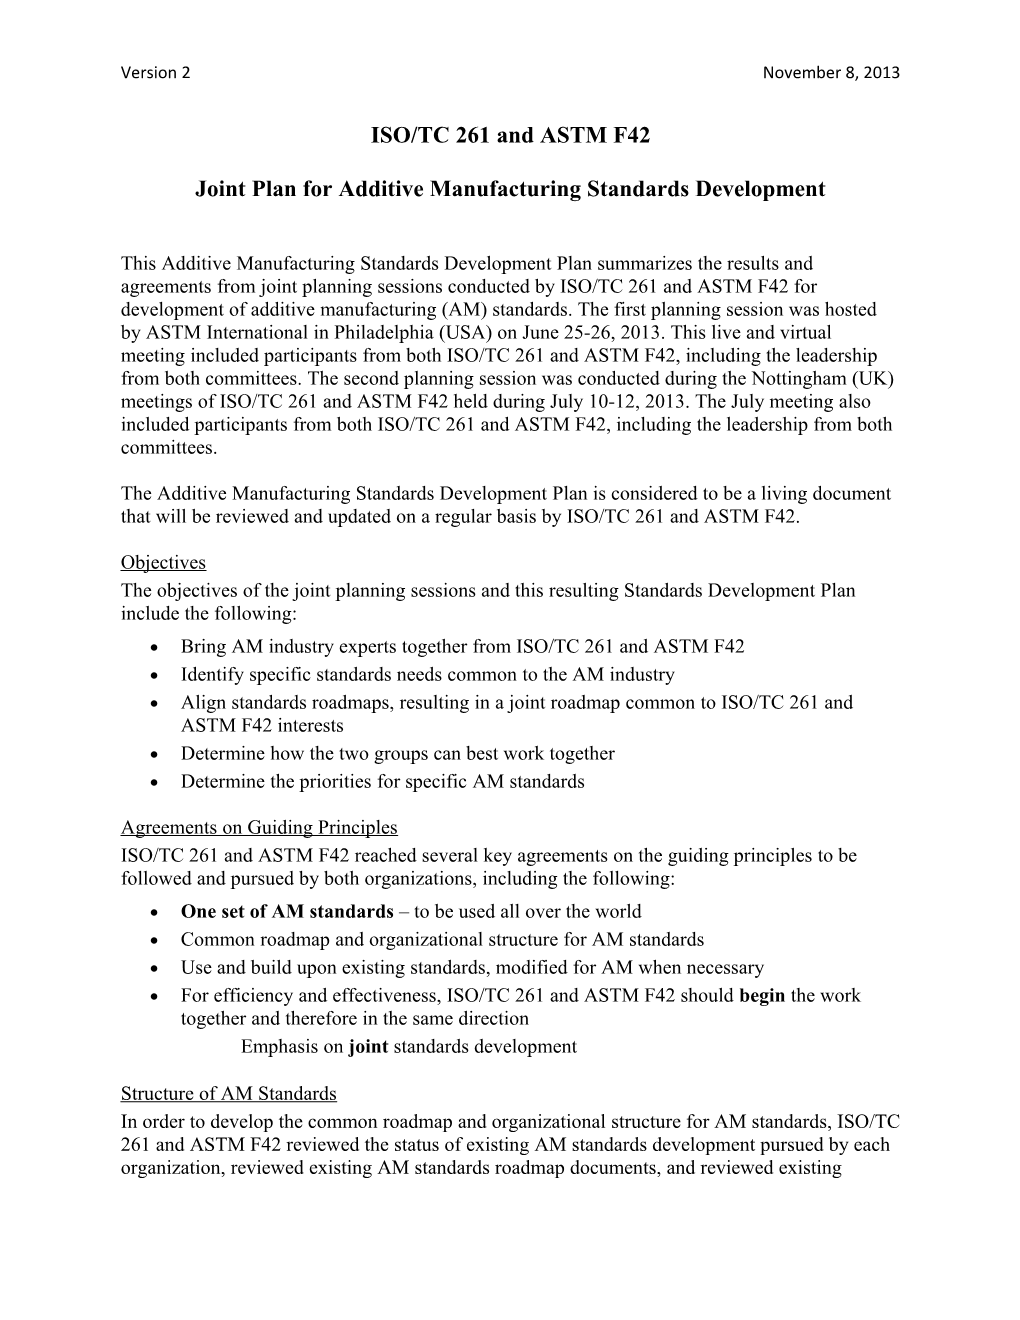 Joint Plan for Additive Manufacturing Standards Development